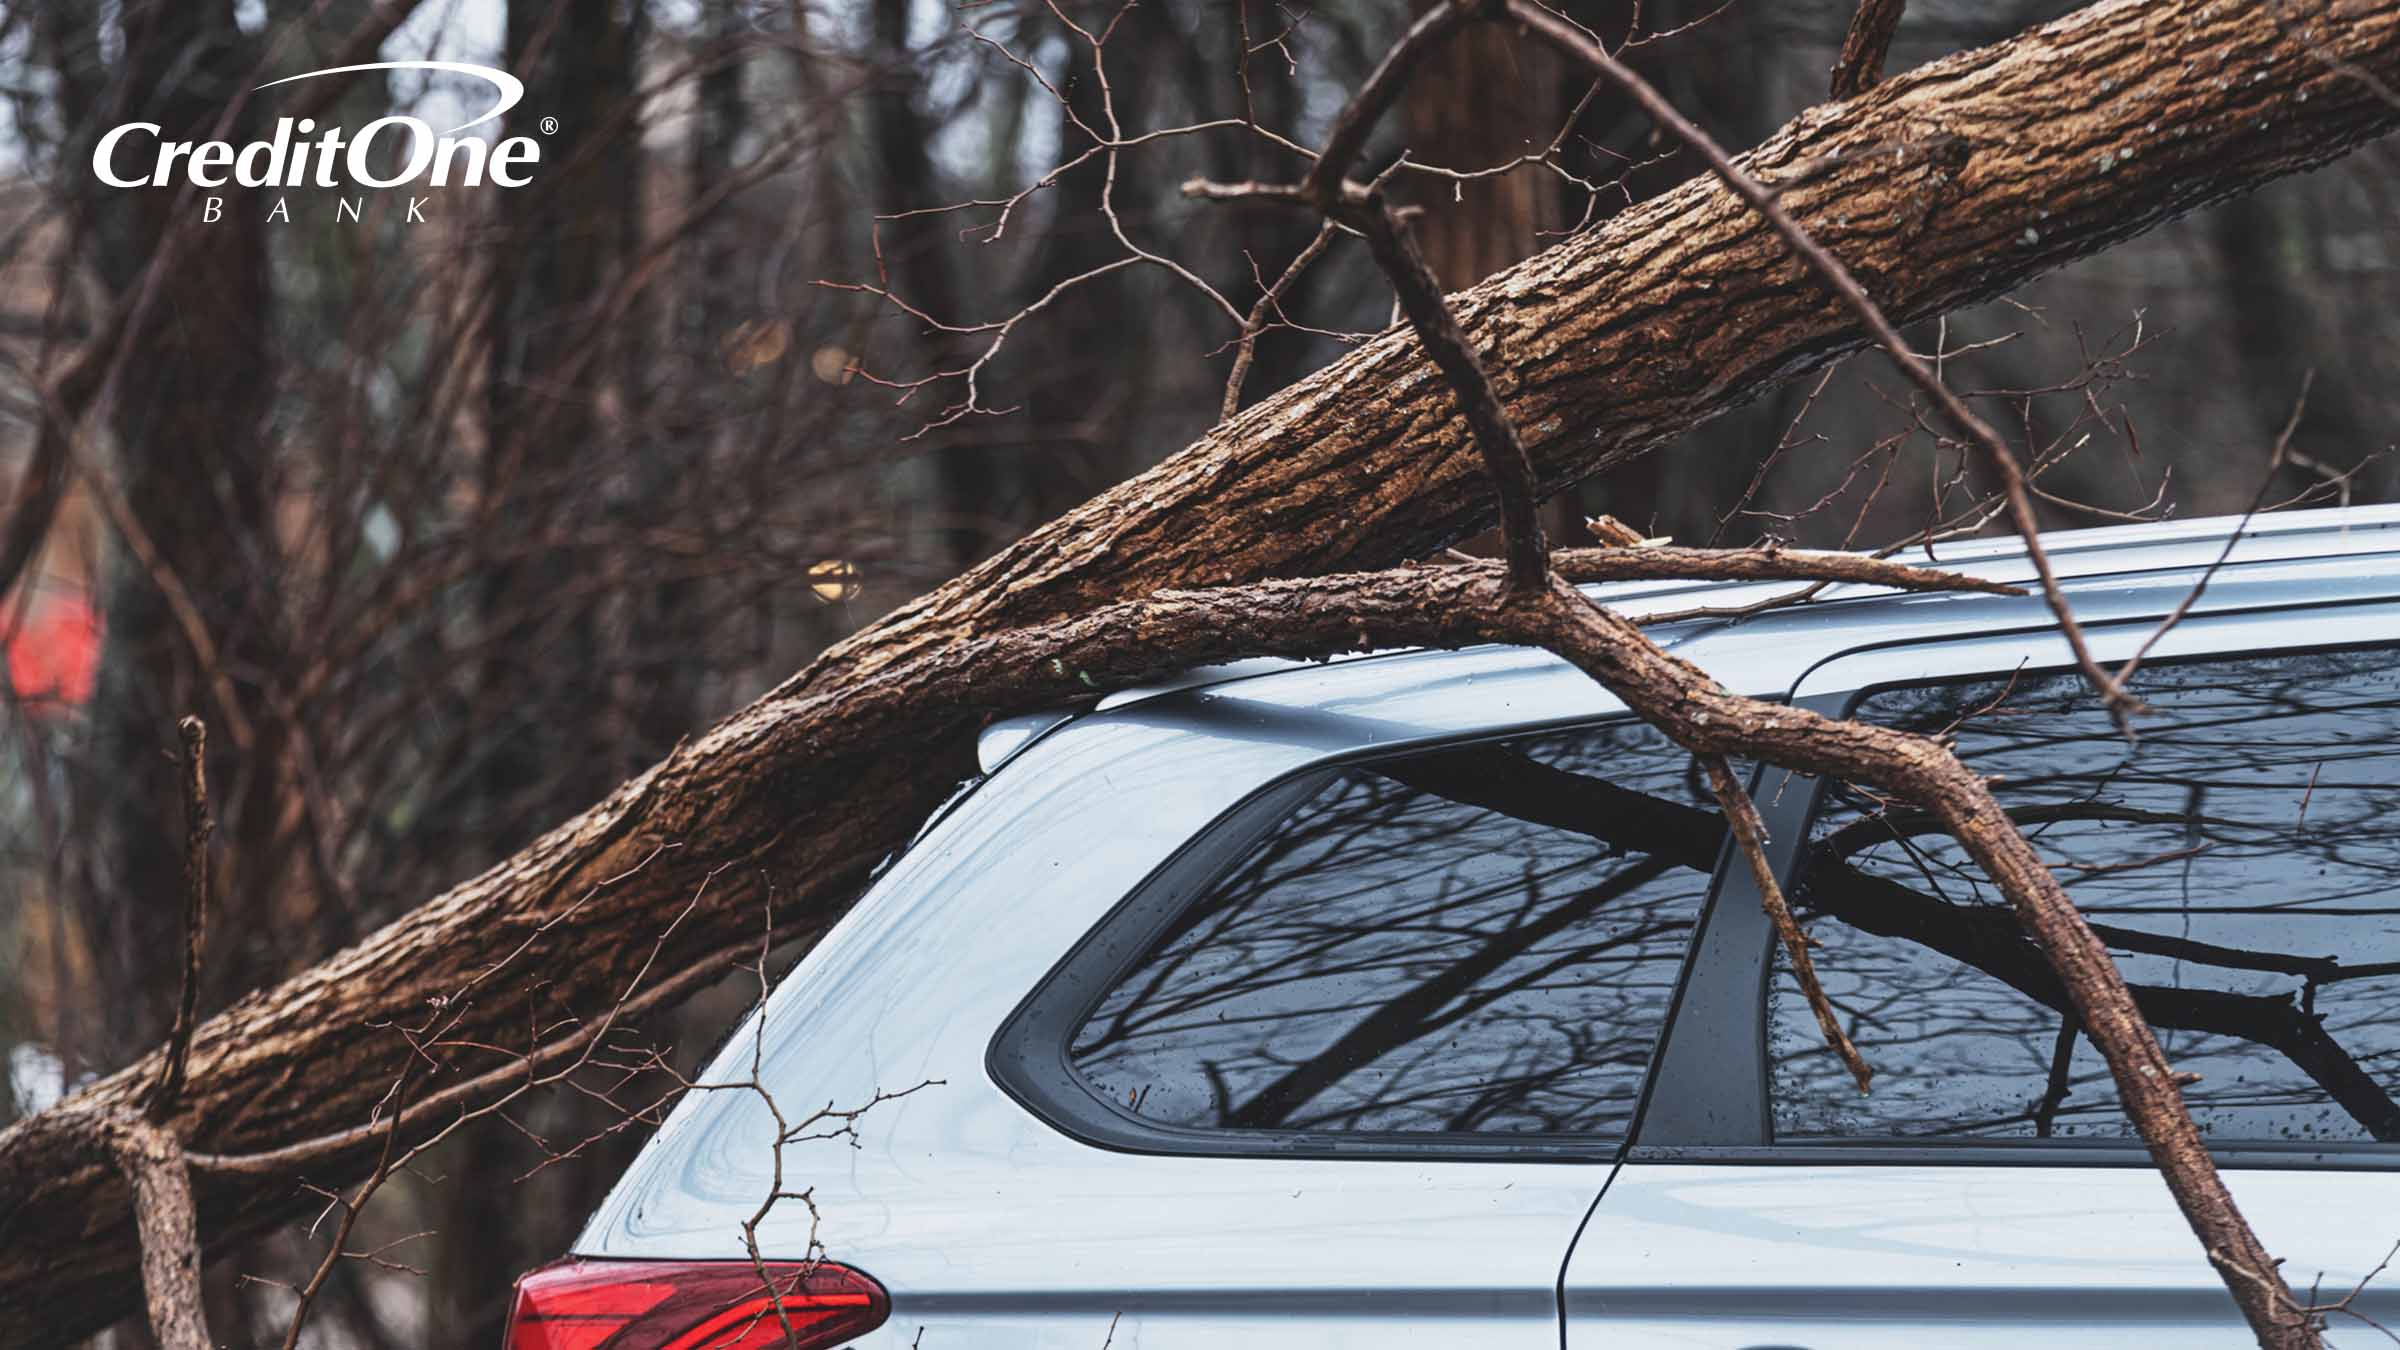 A storm has caused a tree to fall on an SUV, which requires comprehensive coverage to pay for the damage.